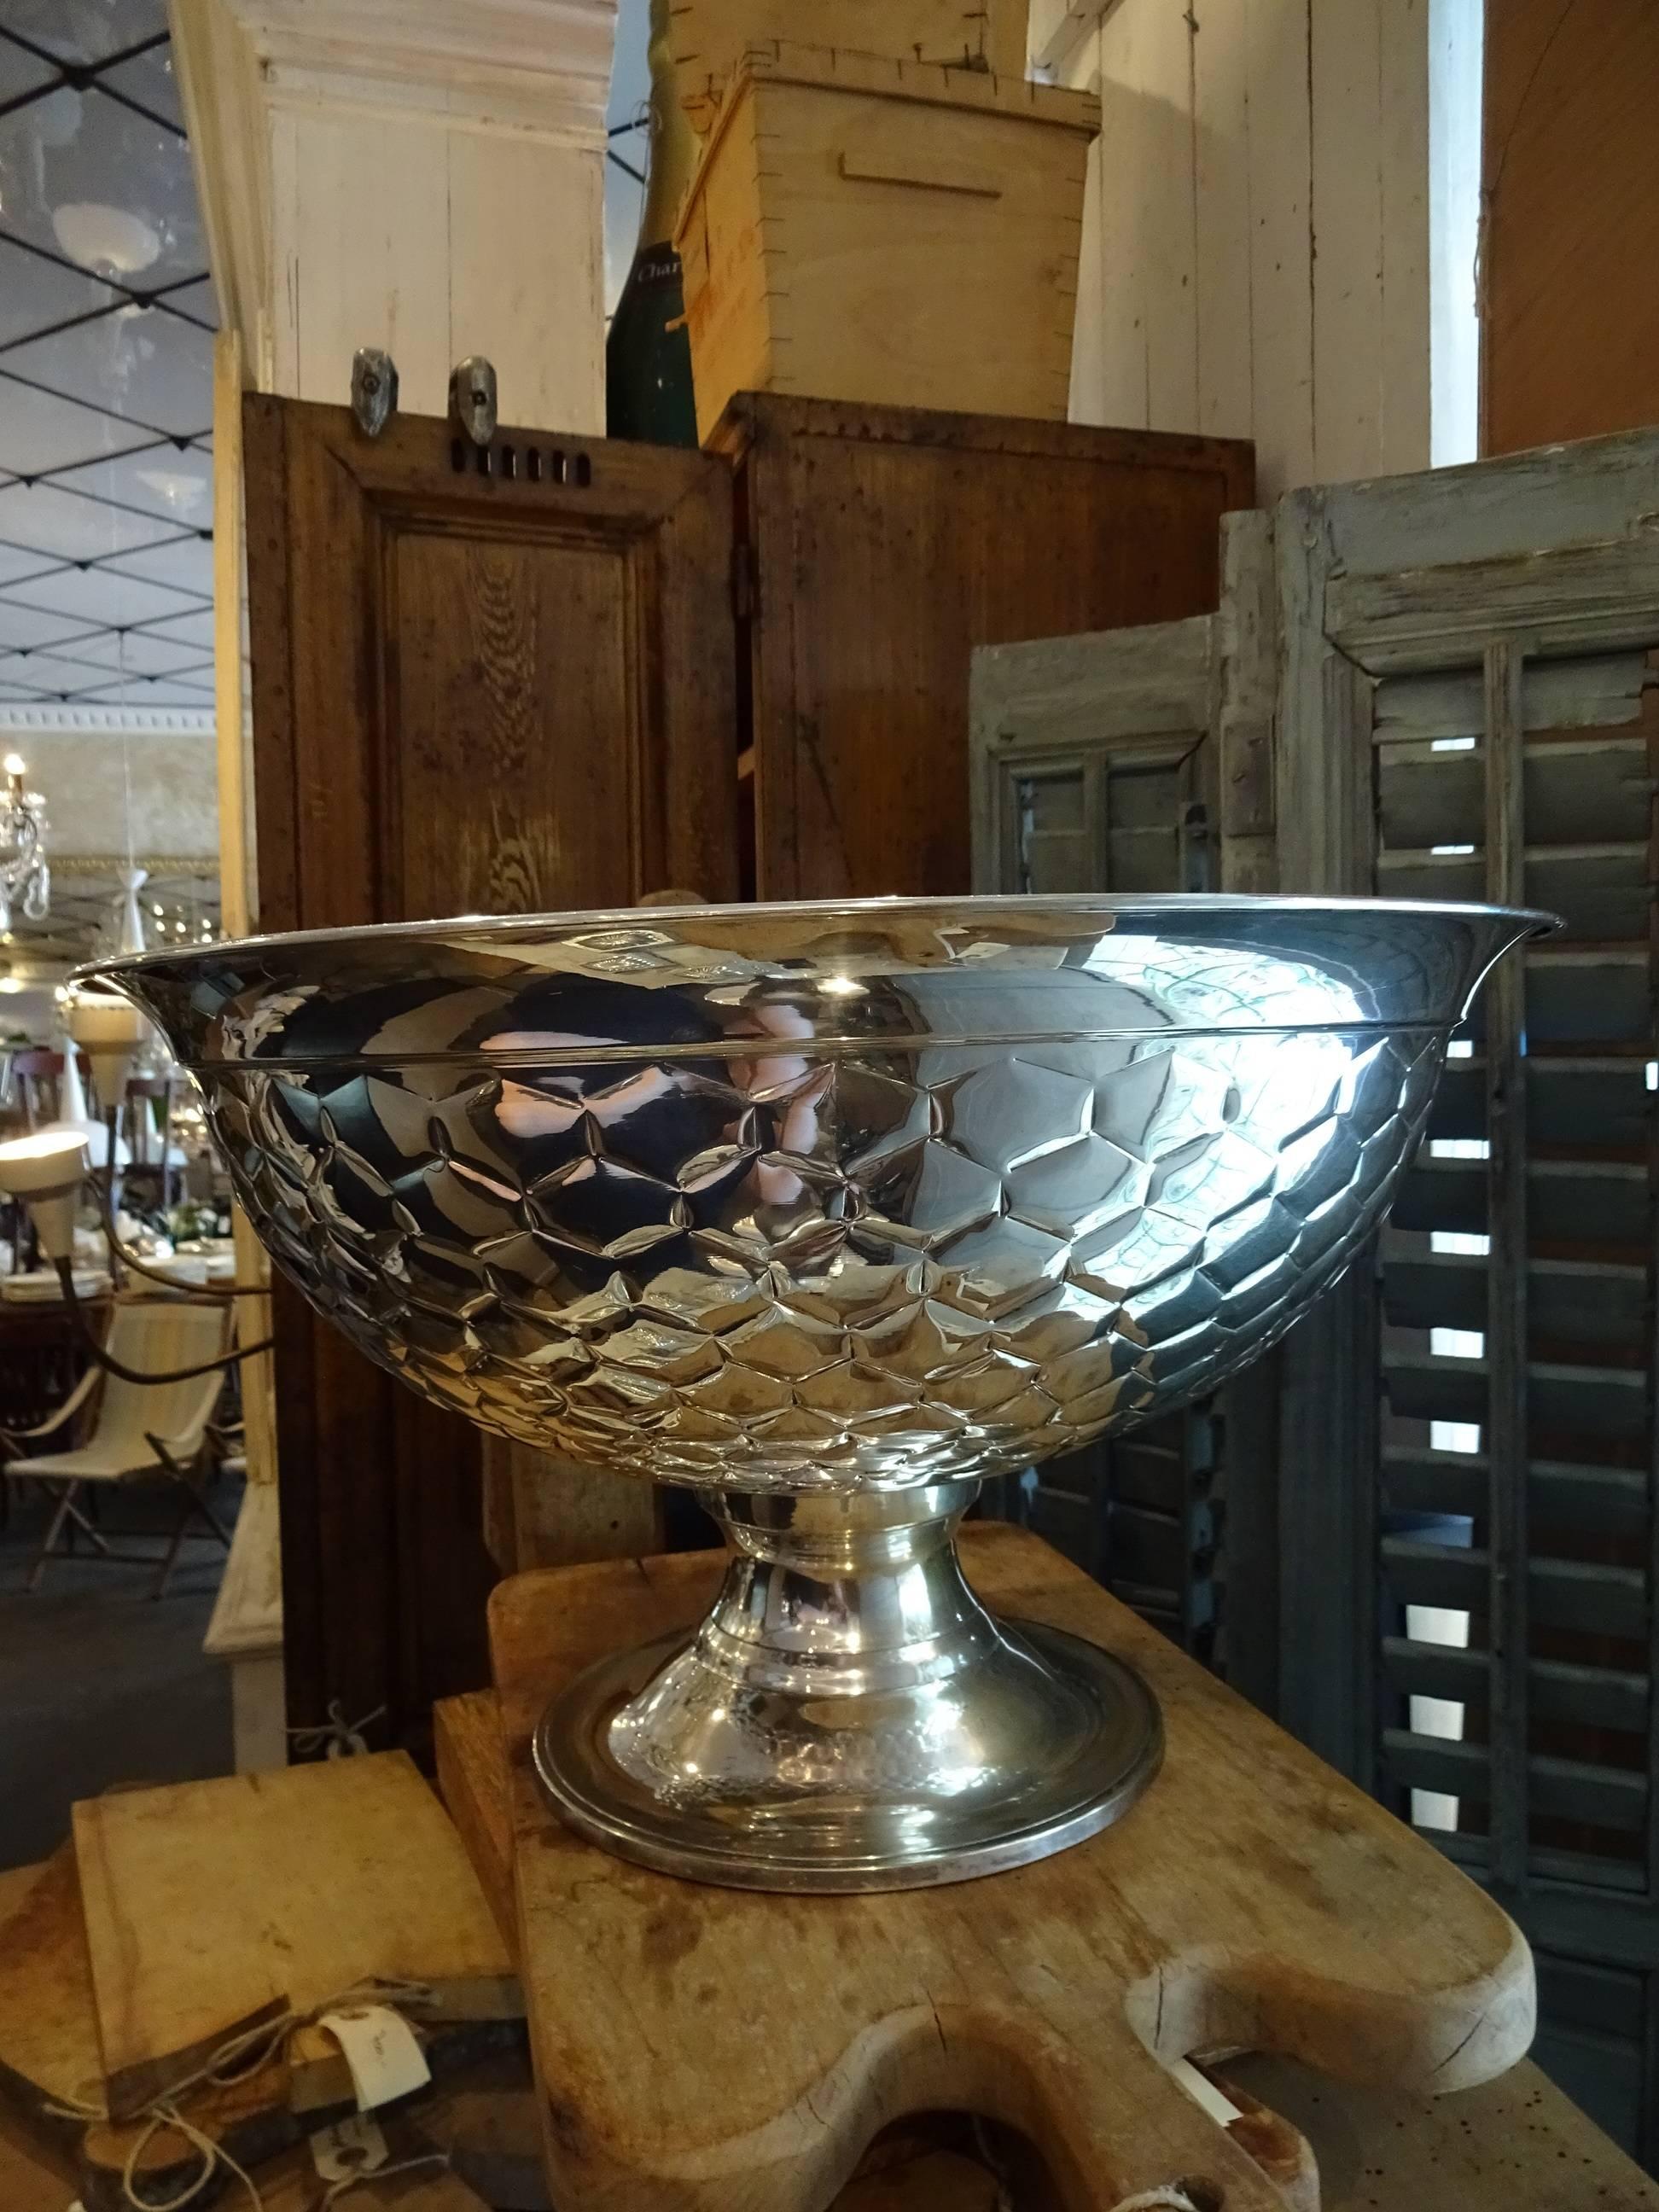 Very rare giant silver plated and super cool champagne cooler from Paris. To date, probably largest champagne cooler we’ve had in Fil de Fer. Could quite easily accommodate a couple of magnum bottles or numerous standard bottles of champagne with